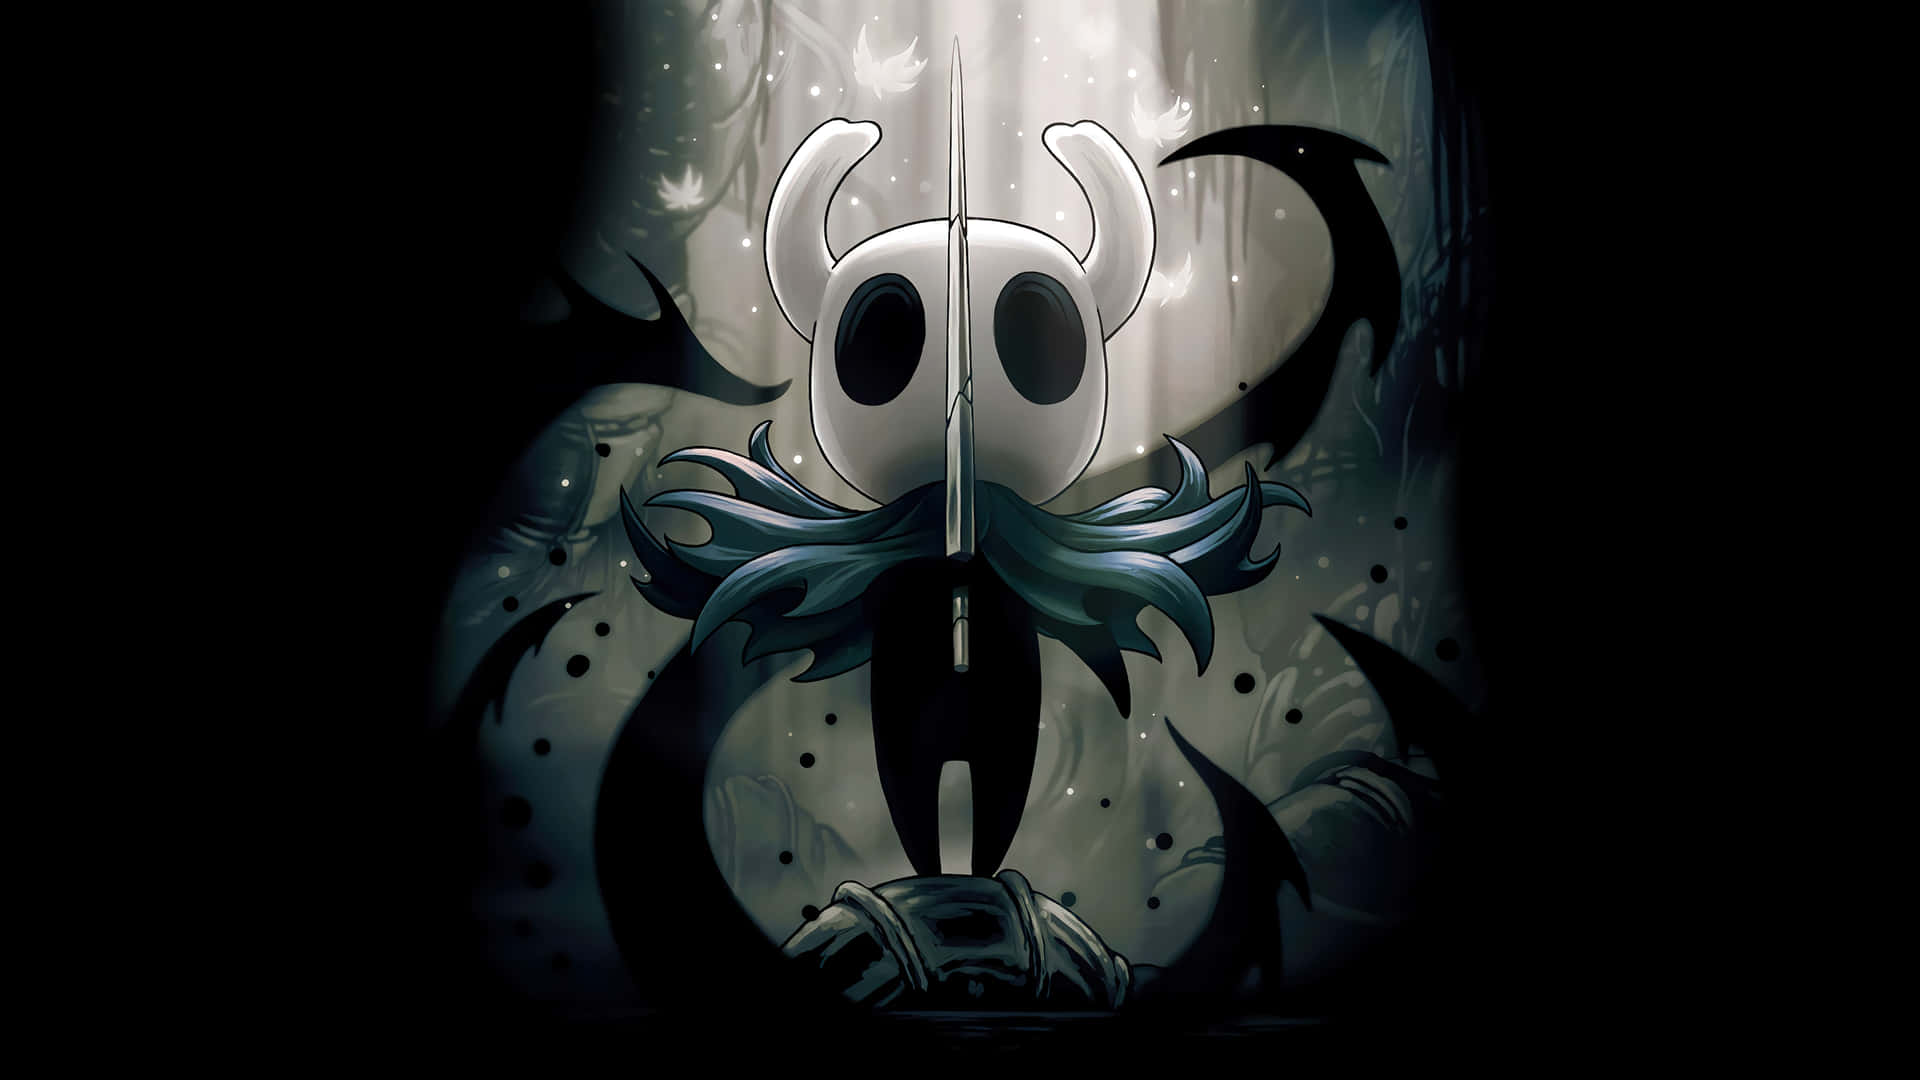 Enter Hubris, a gloomy abandoned town from Hollow Knight